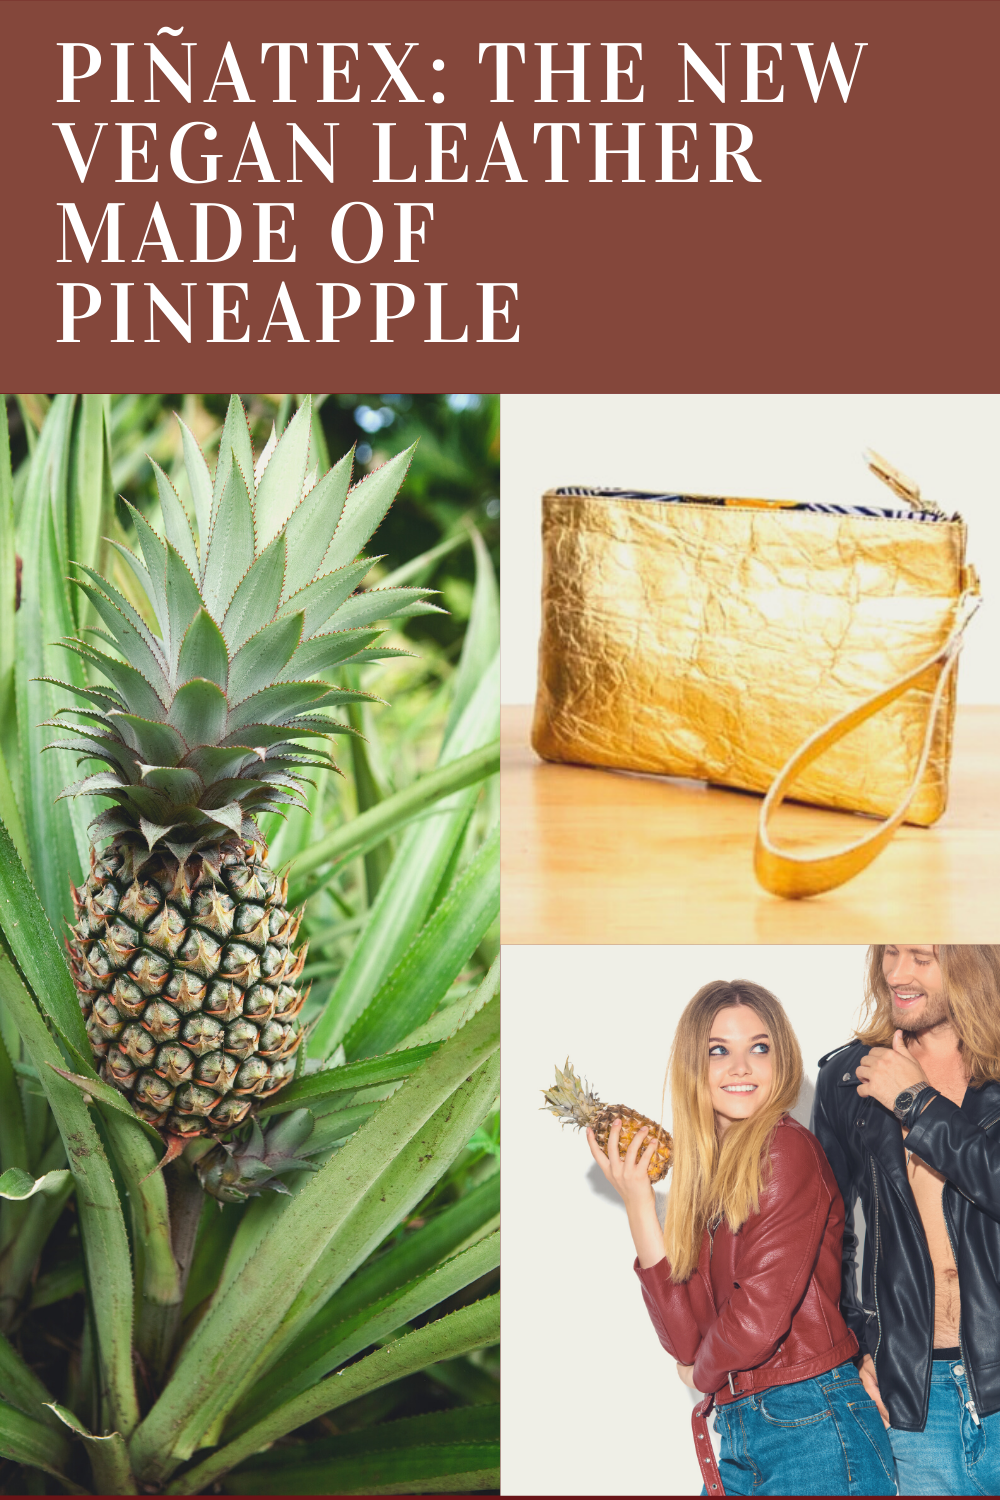 Piñatex: The new vegan leather made of pineapple